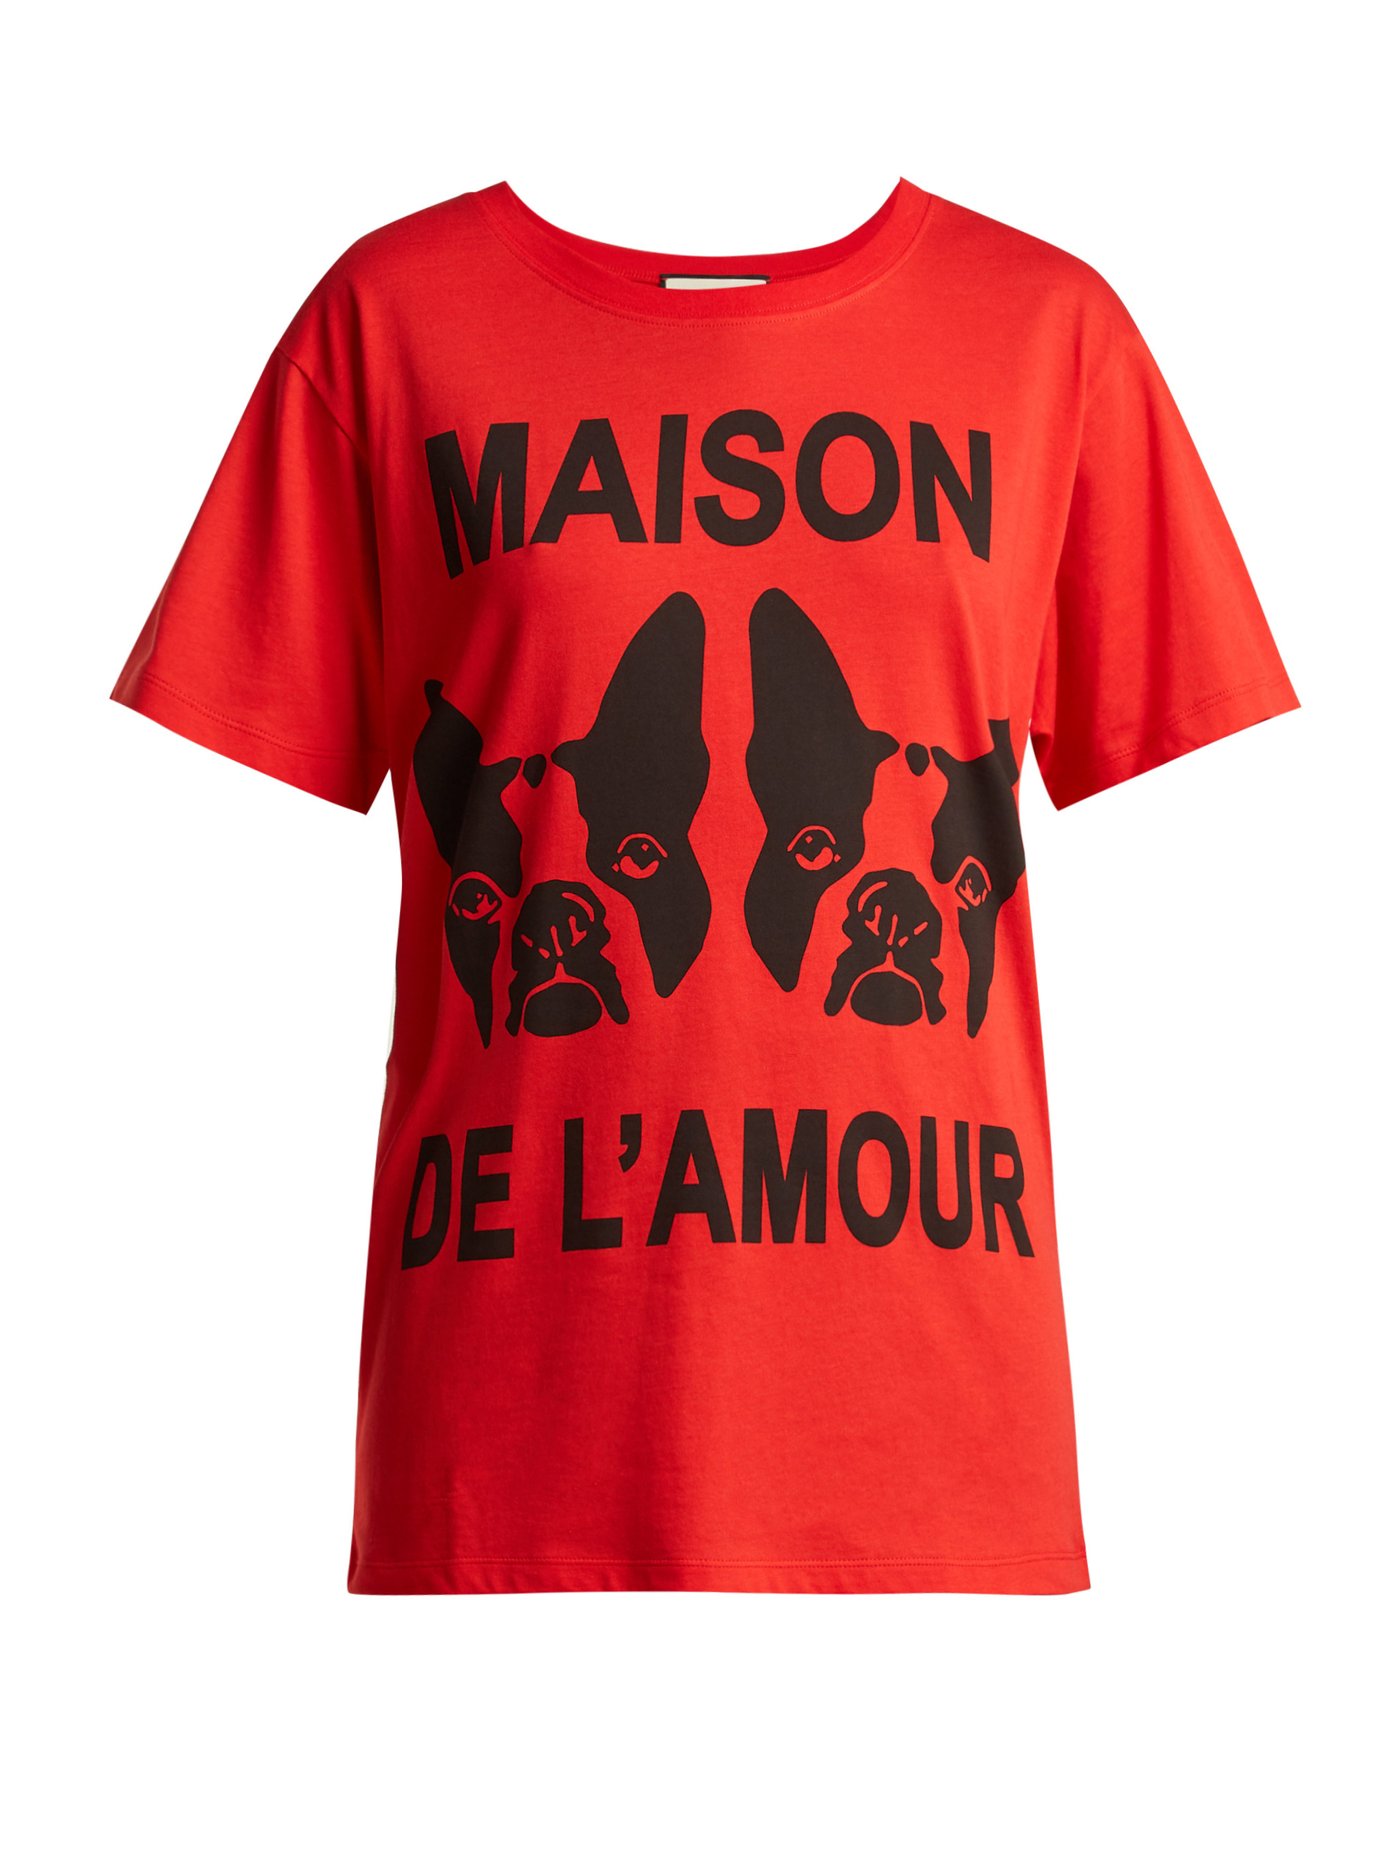 gucci amour t shirt